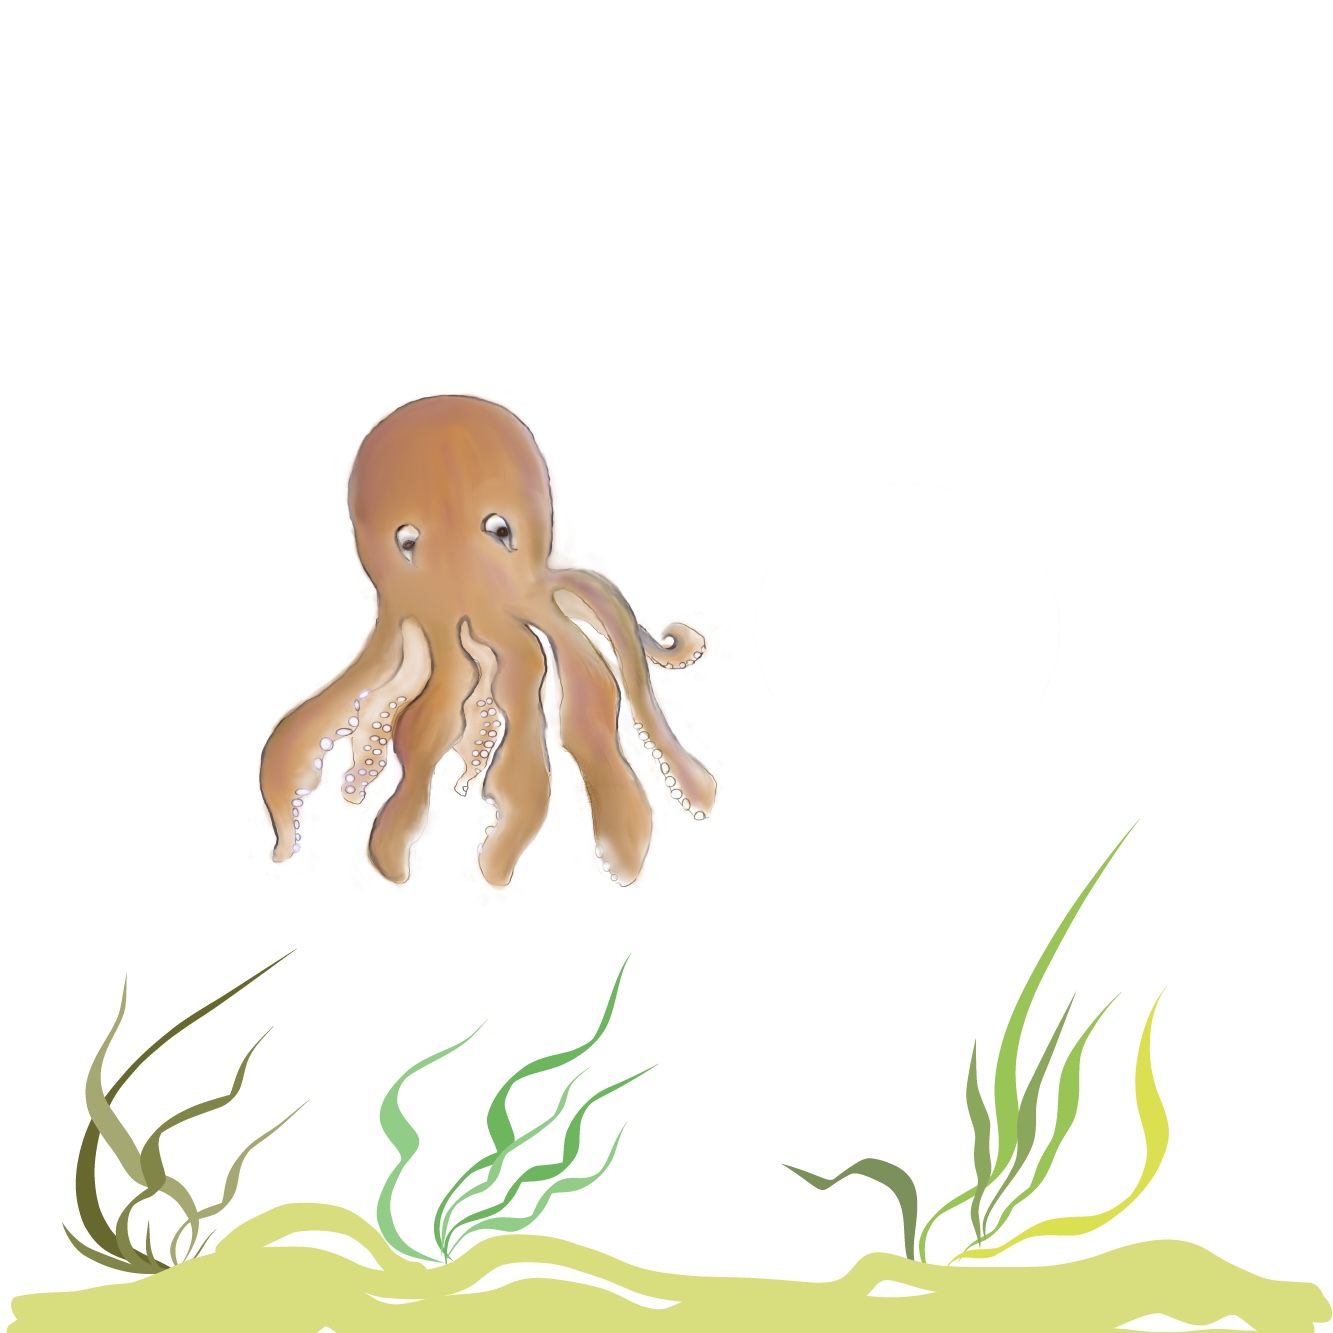 Octopus preview image.